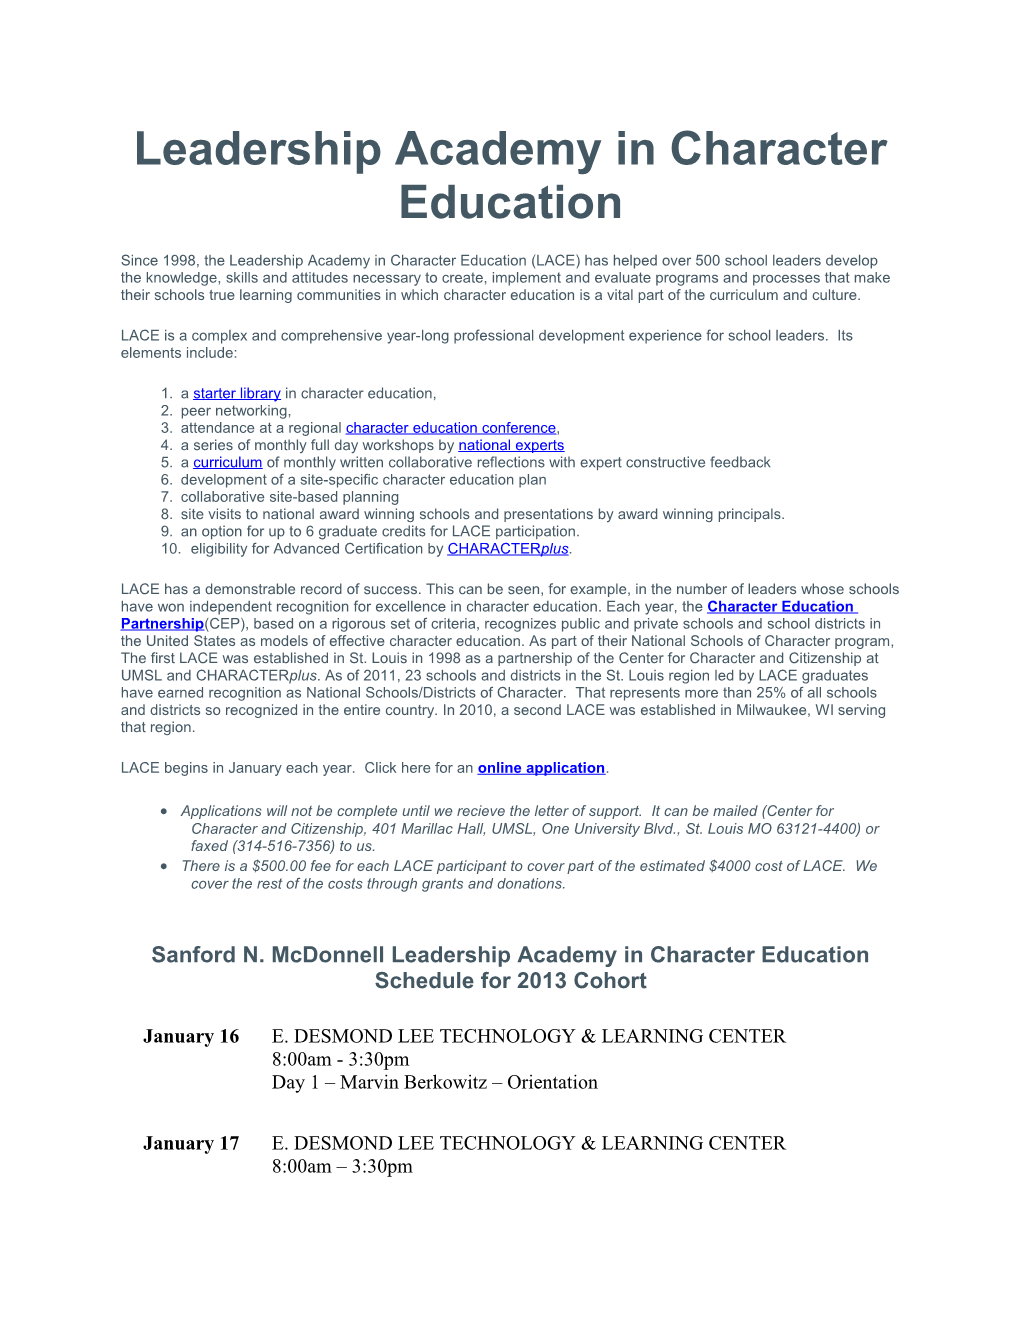 Leadership Academy in Character Education